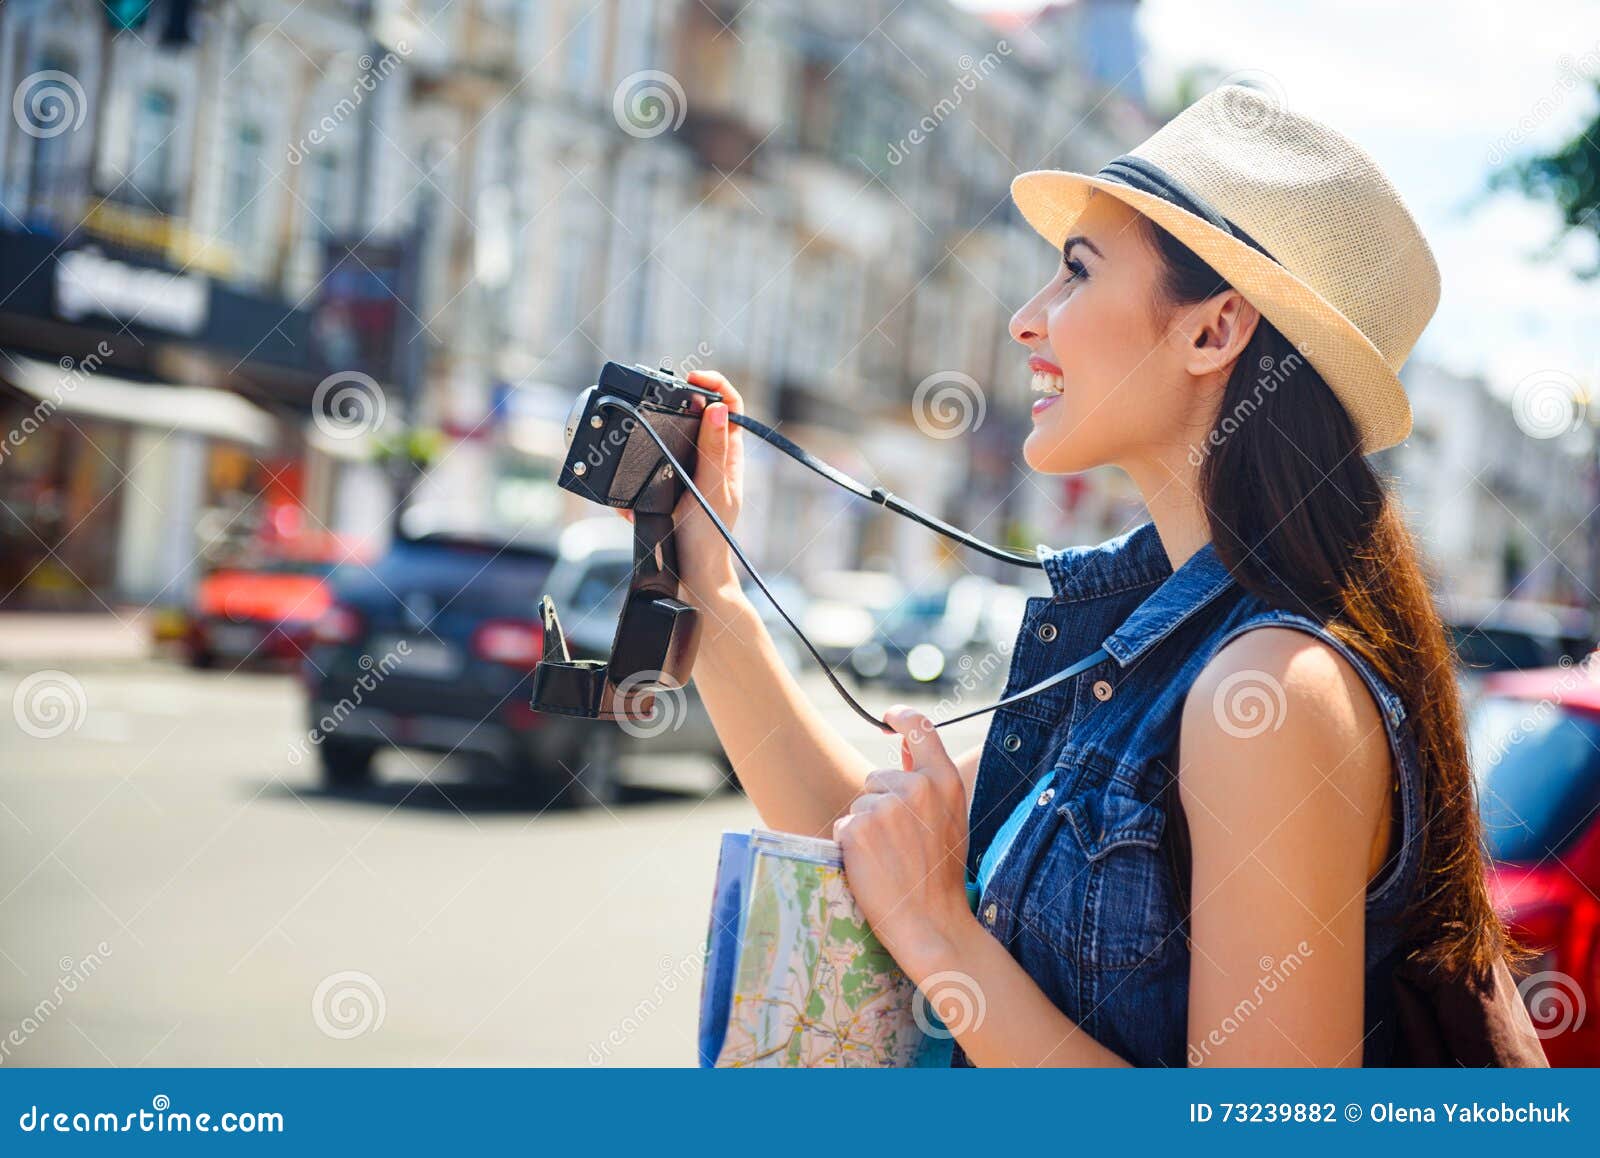 Cheerful Young Woman Taking Shots of City Stock Photo - Image of ...